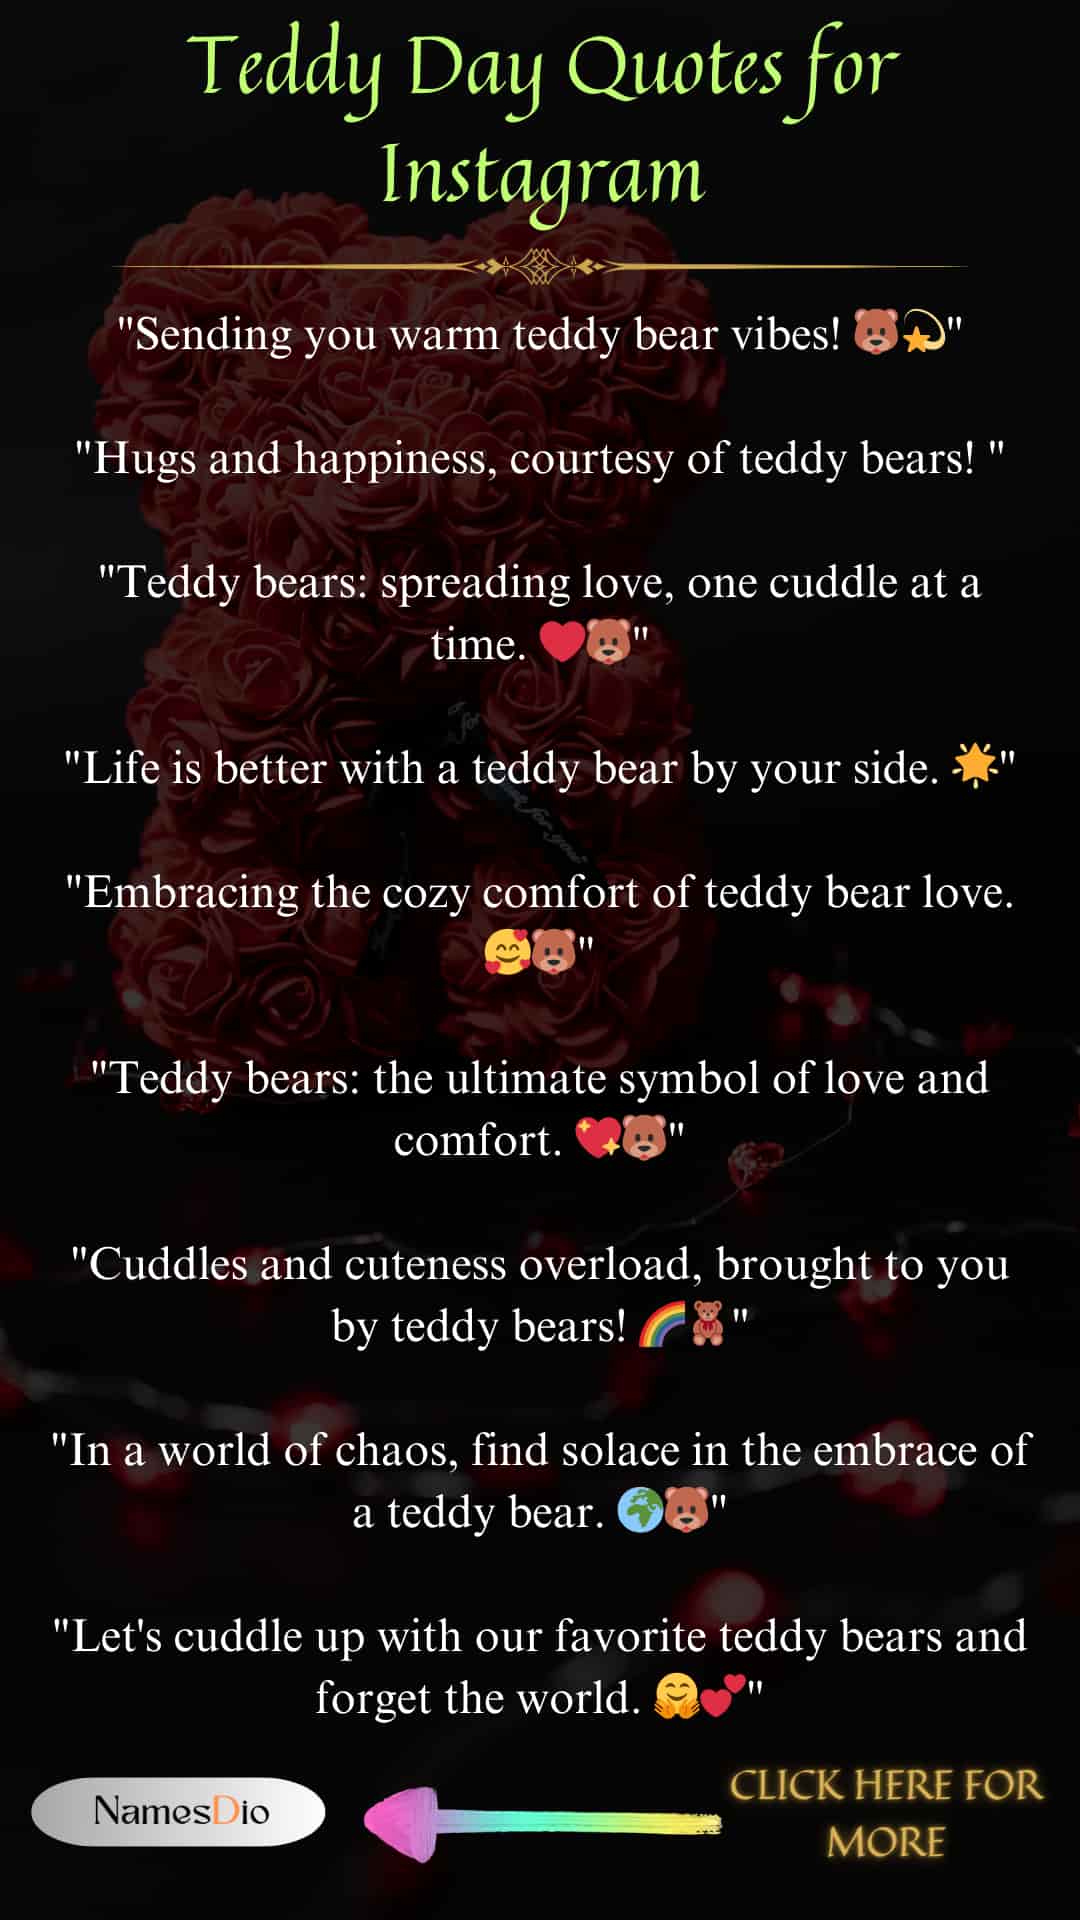 Teddy-Day-Quotes-for-Instagram